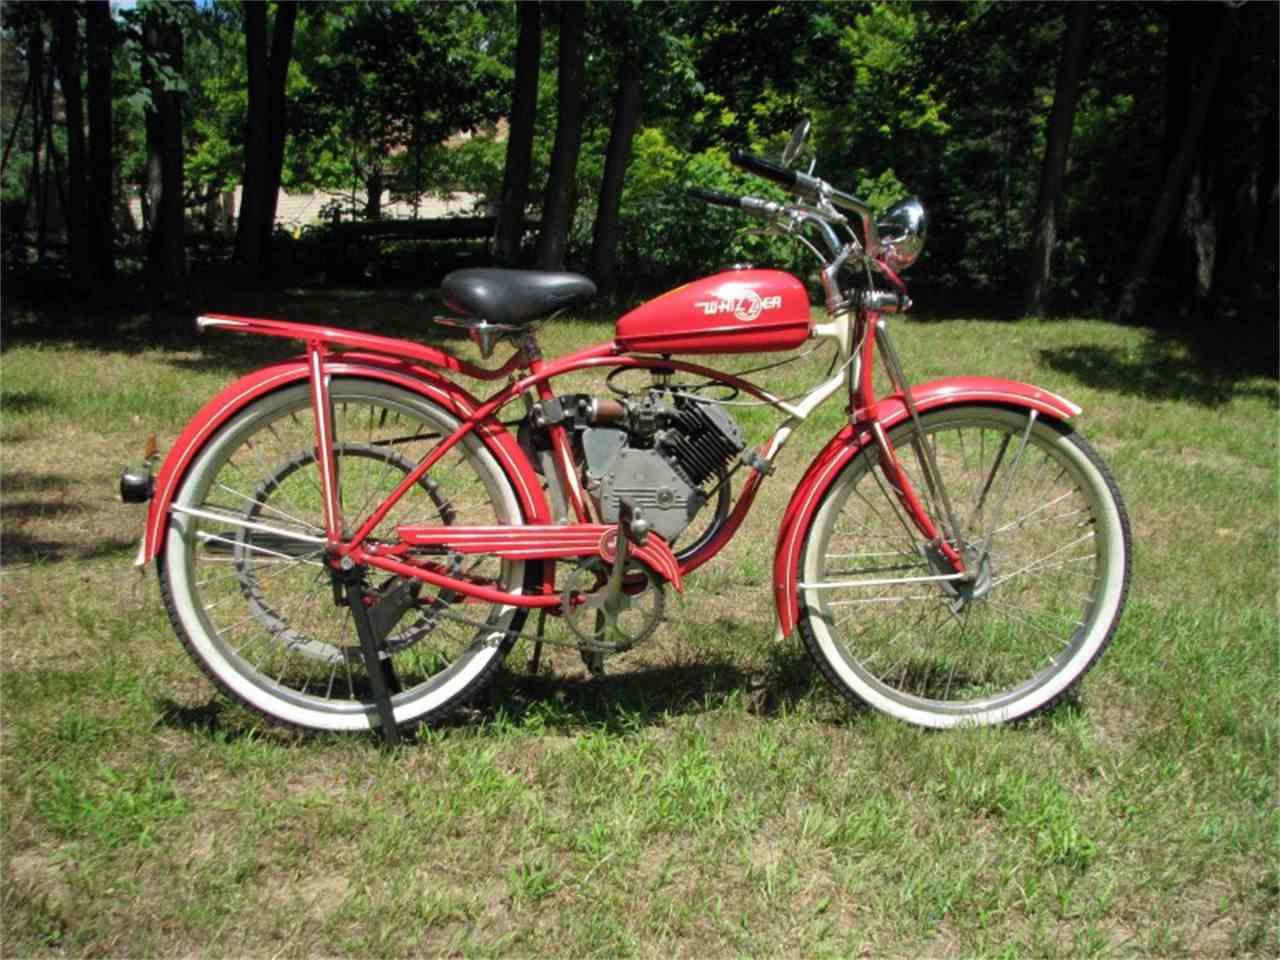 1948 Whizzer Motorcycle for Sale CC893883